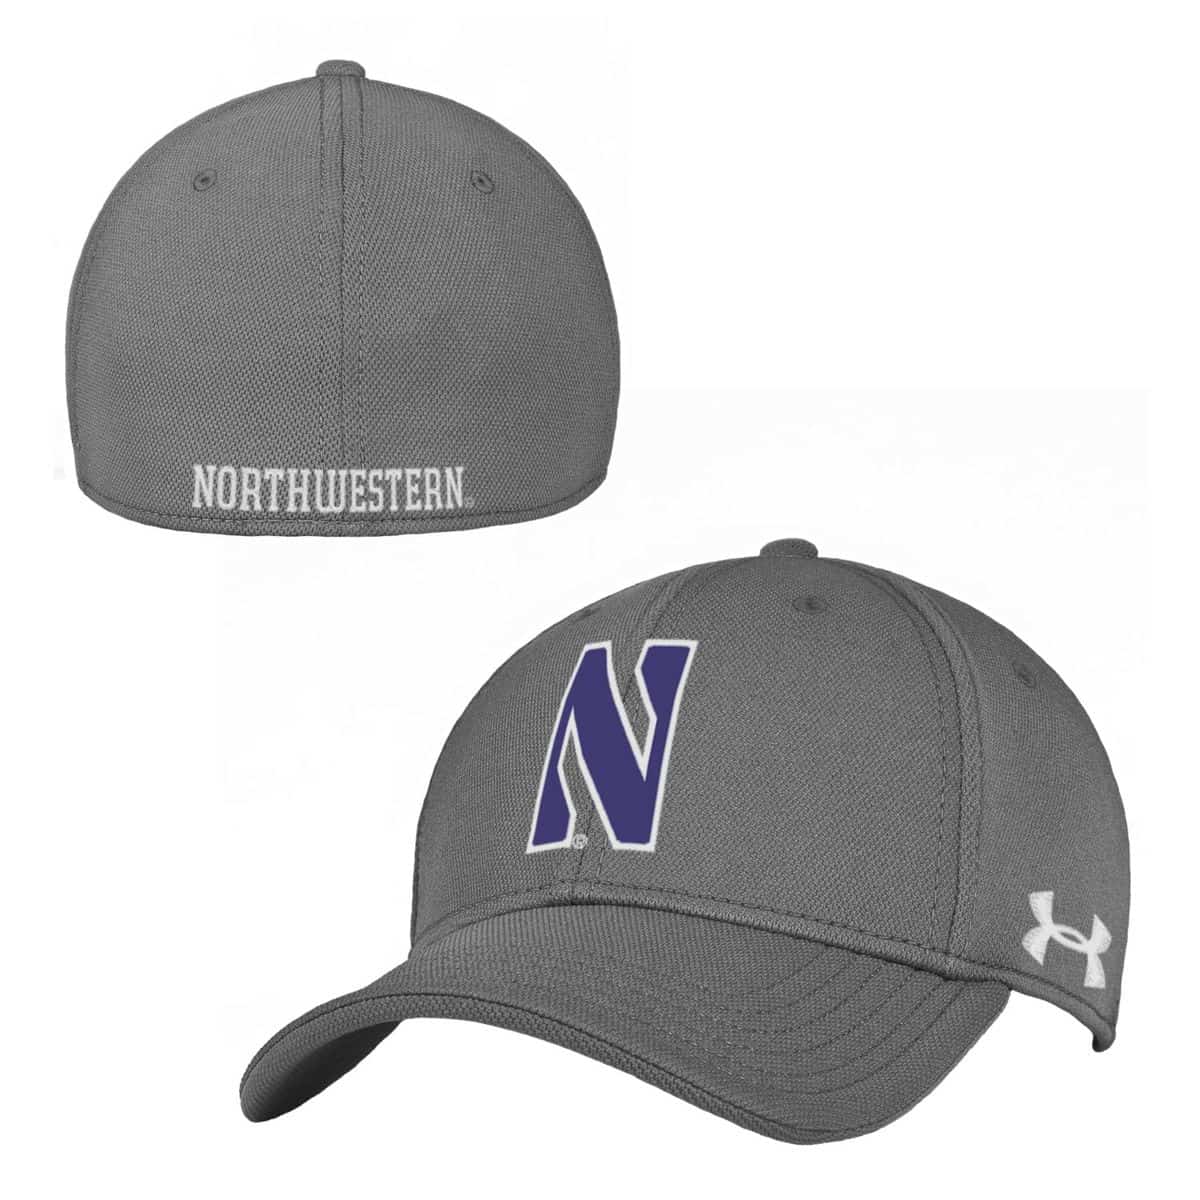 Northwestern Wildcats Under Armour Grey Stretch Fit Hat with